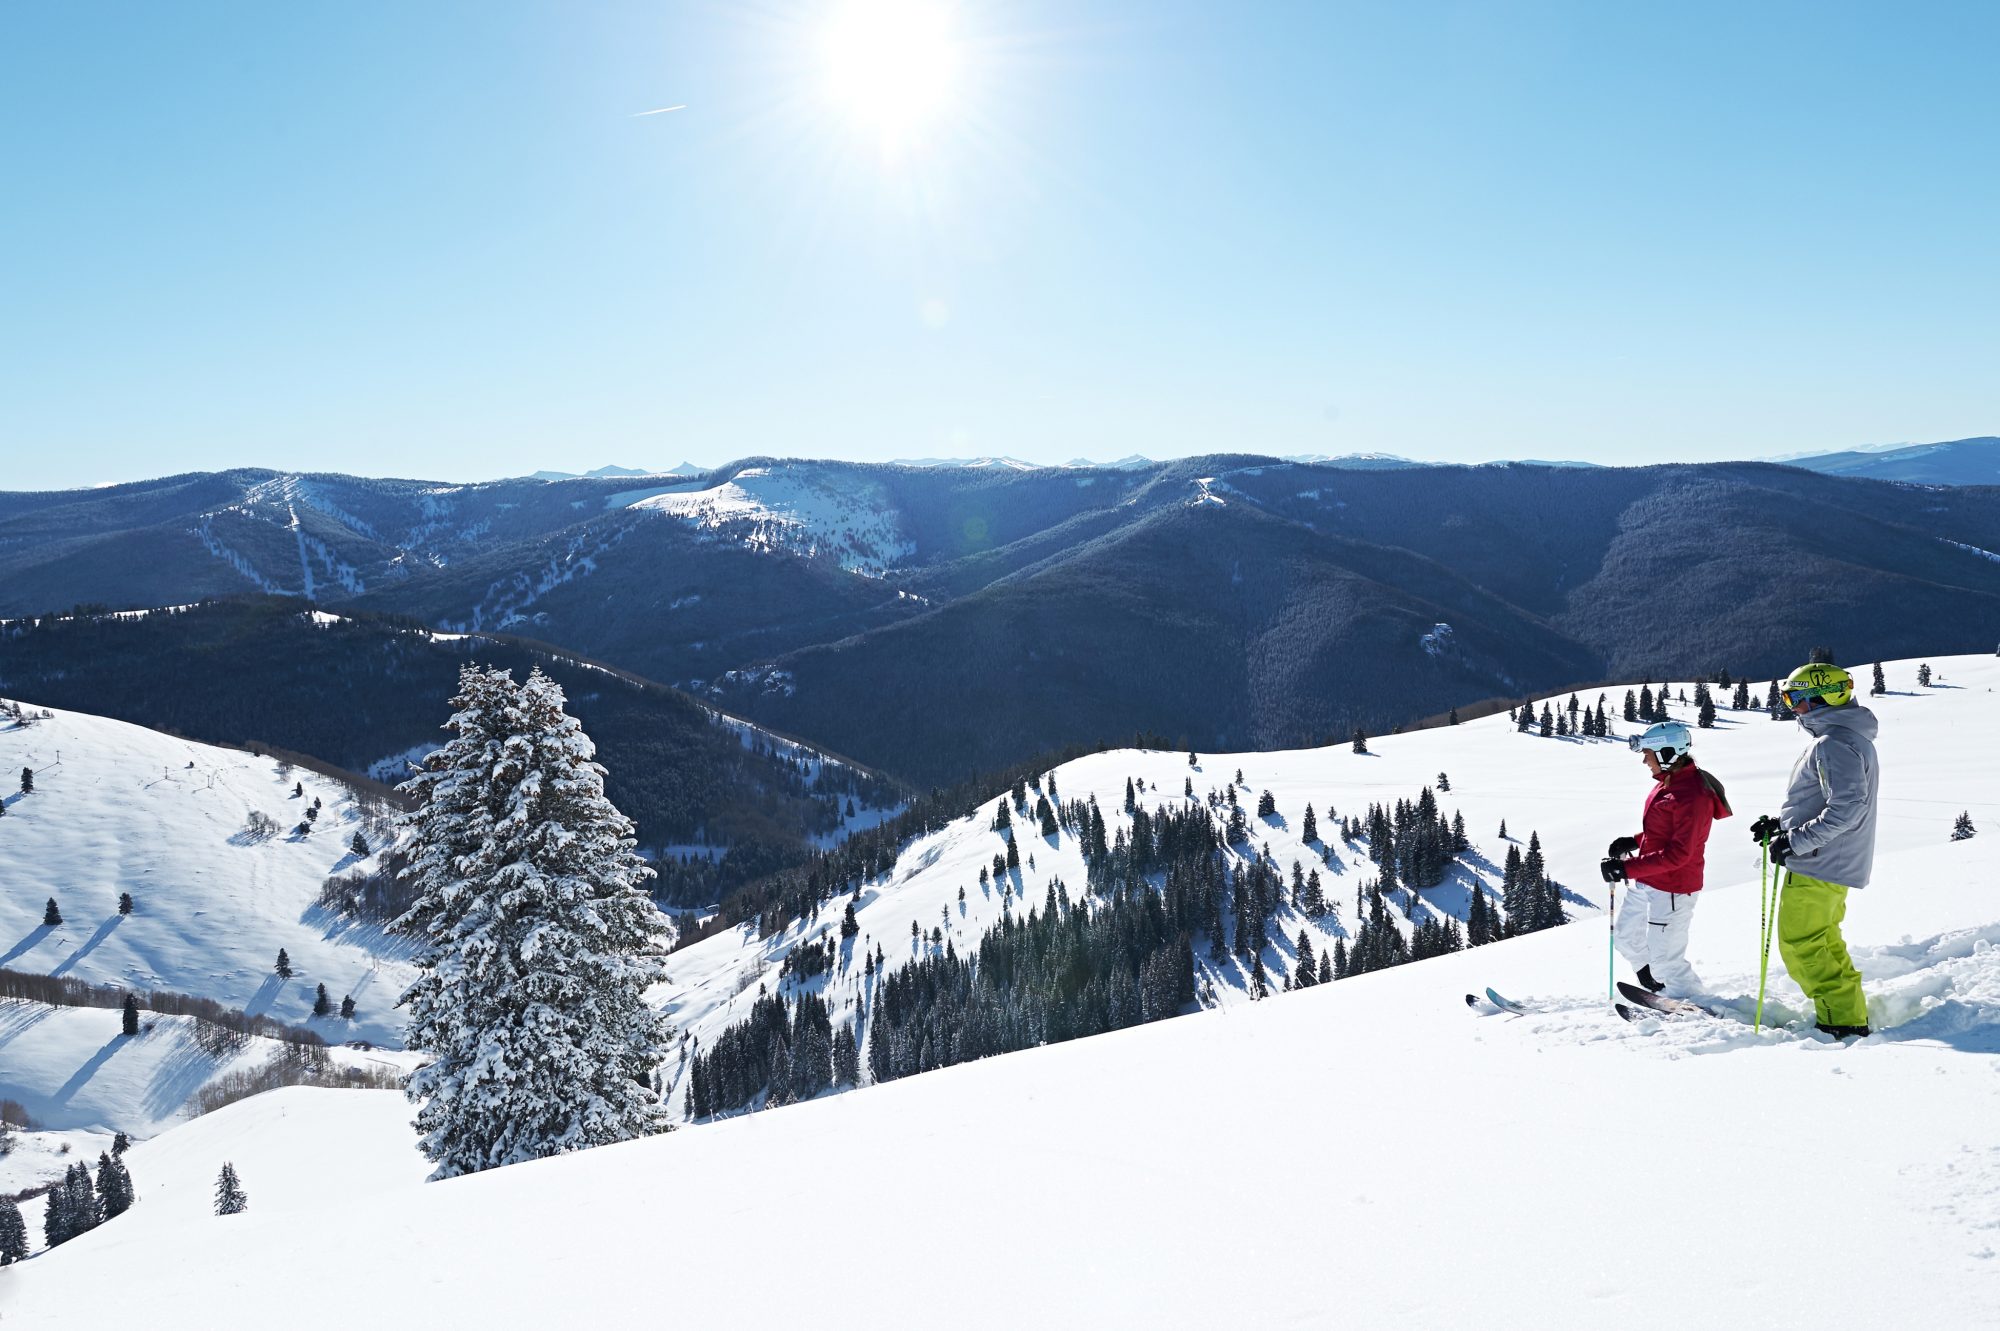 Scenic scene. Vail Mountain. Photo: Jack Affleck. Vail Resorts. Epic Pass expands European Access in World-Class Resort in France and Italy: Les 3 Vallées in France and Skirama Dolomiti Adamello Brenta in Italy.